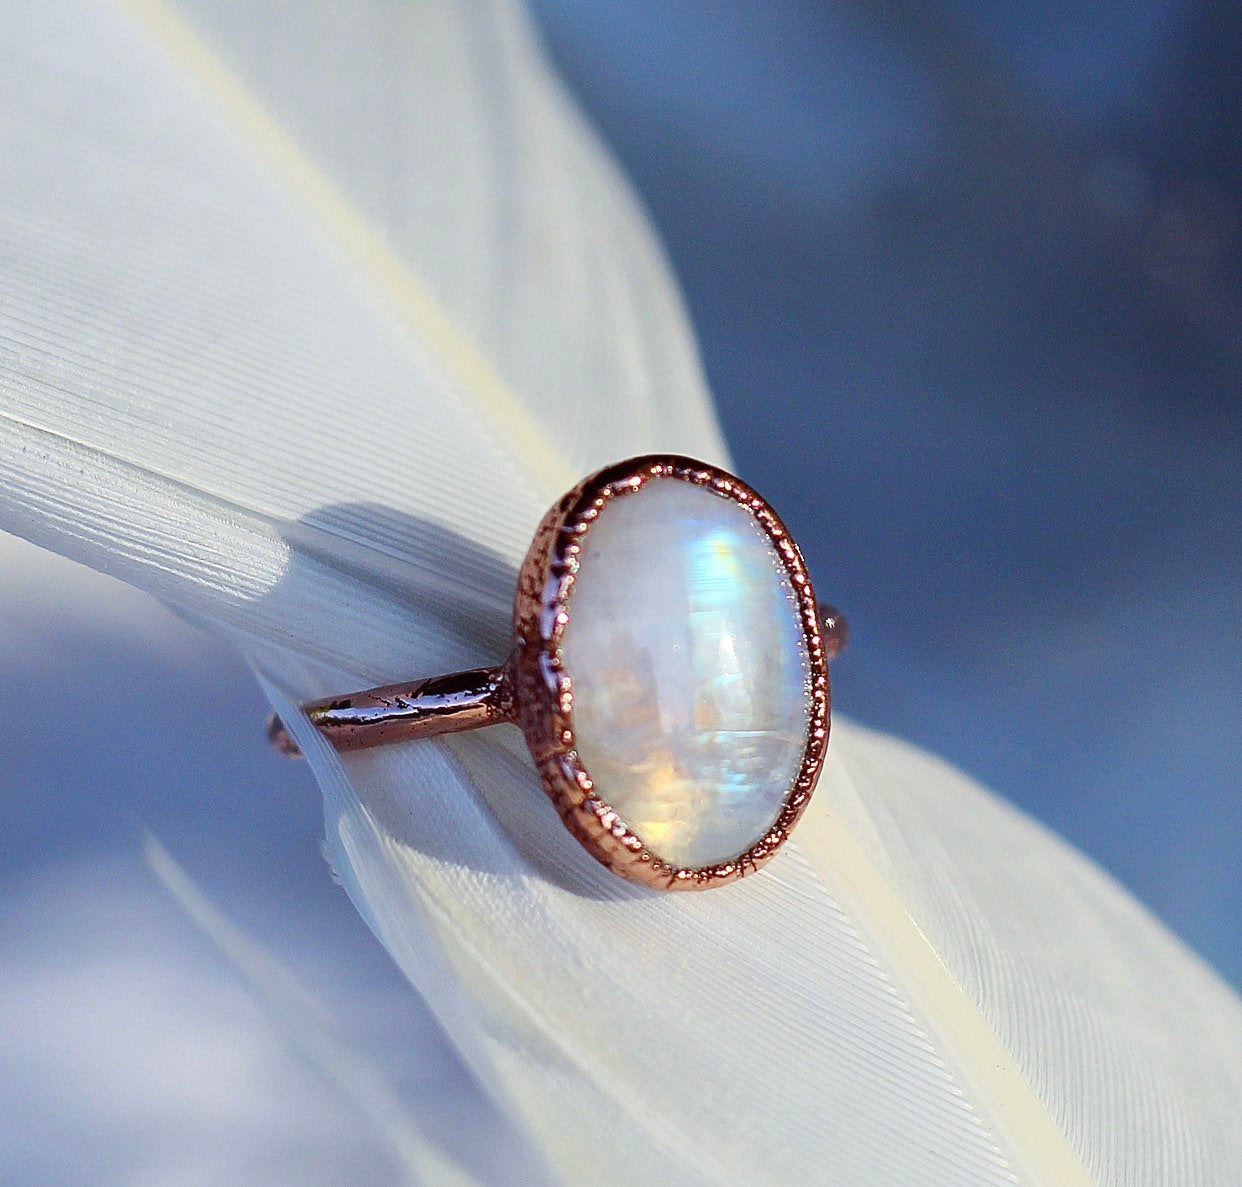 Moonstone Oval Ring, Moonstone Raw Stone, Big Raw Moonstone Ring, Rainbow Moonstone Ring, Moonstone Copper Ring, Raw Chunky Stone Ring